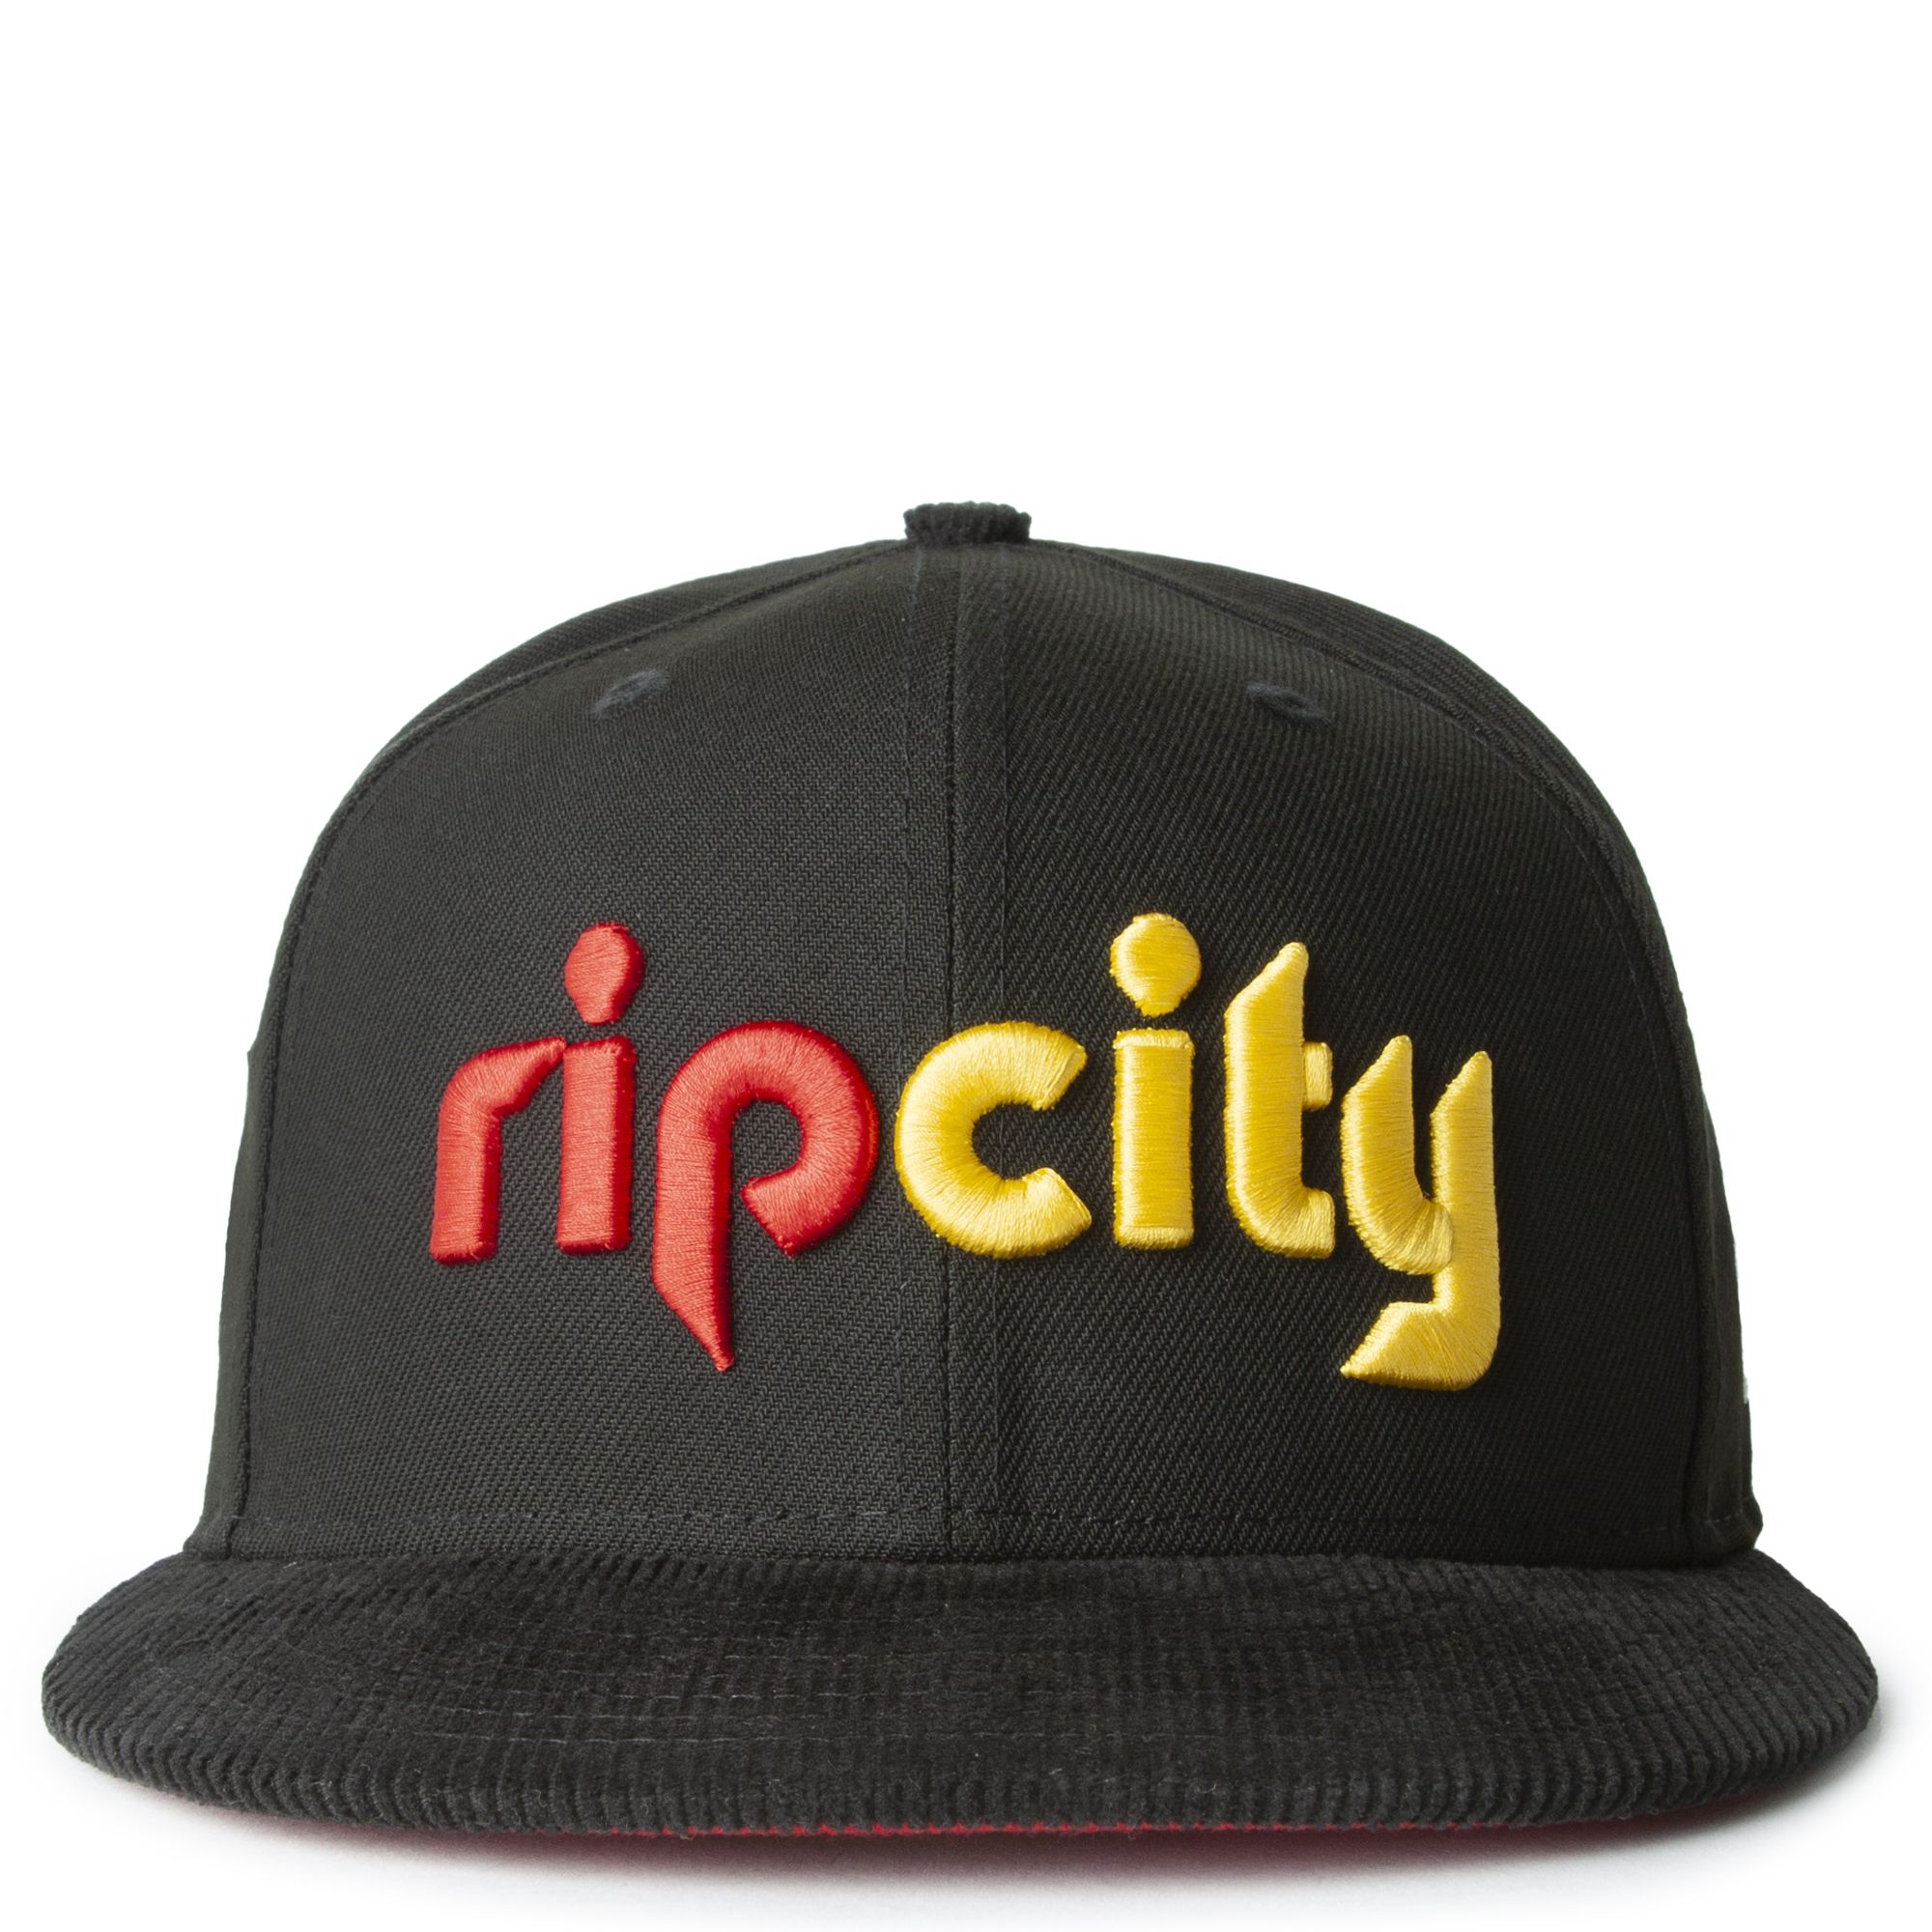 New Era Caps 59FIFTY Fitted Hat Black